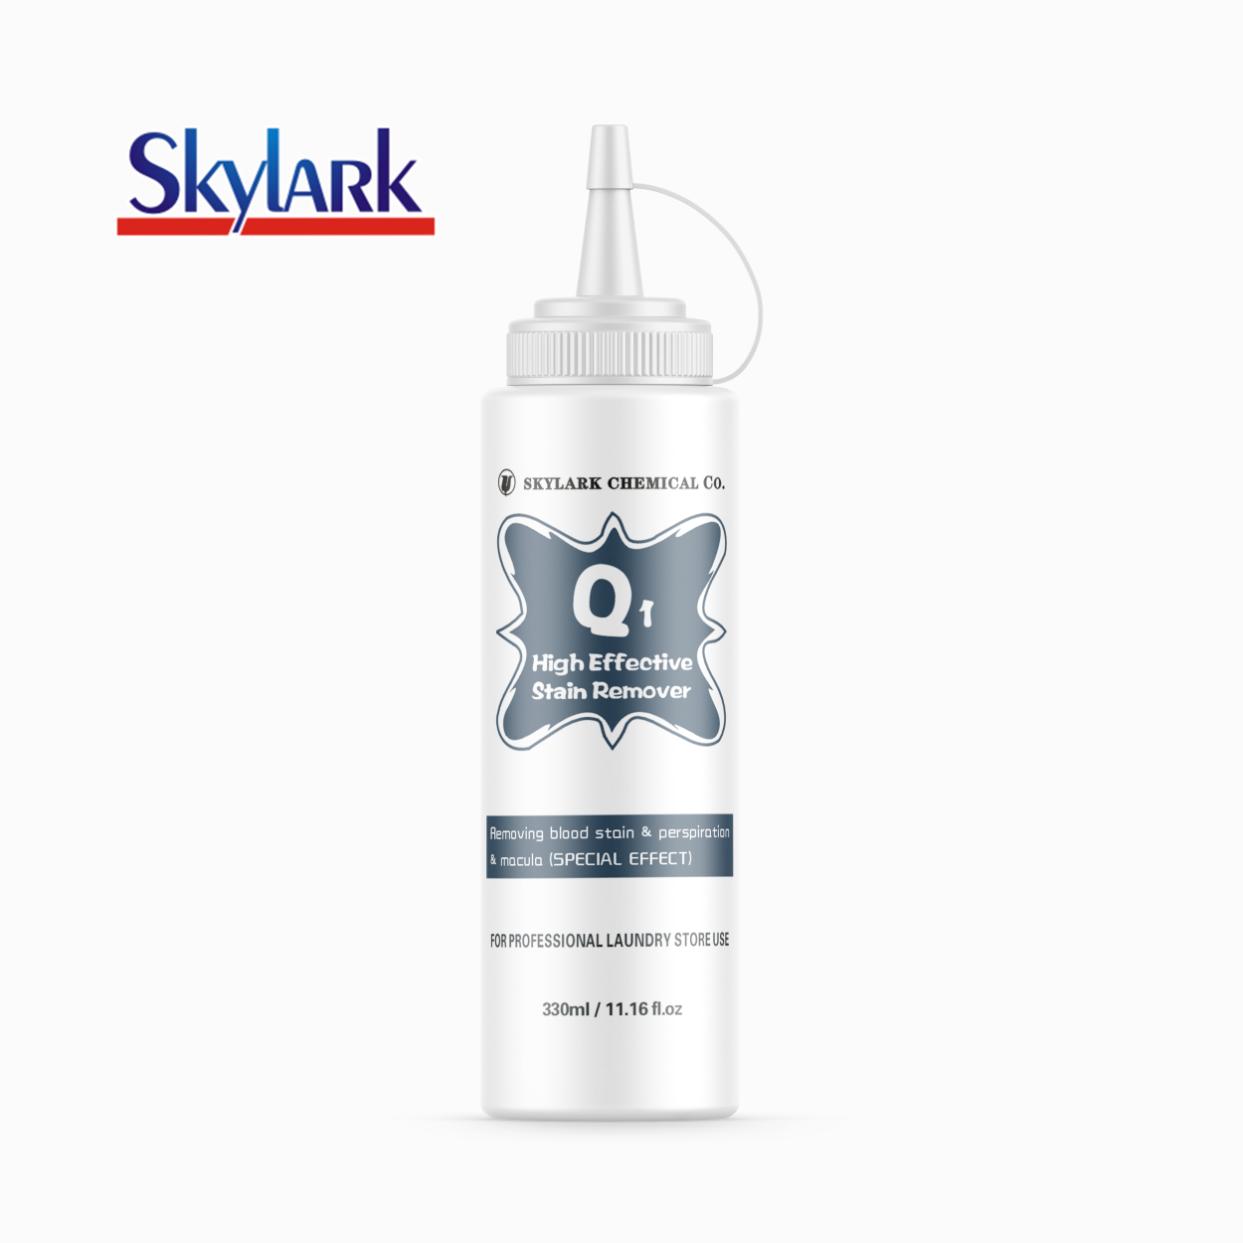 Super Q1 - High Effective Stain Remover With Excellent Performance